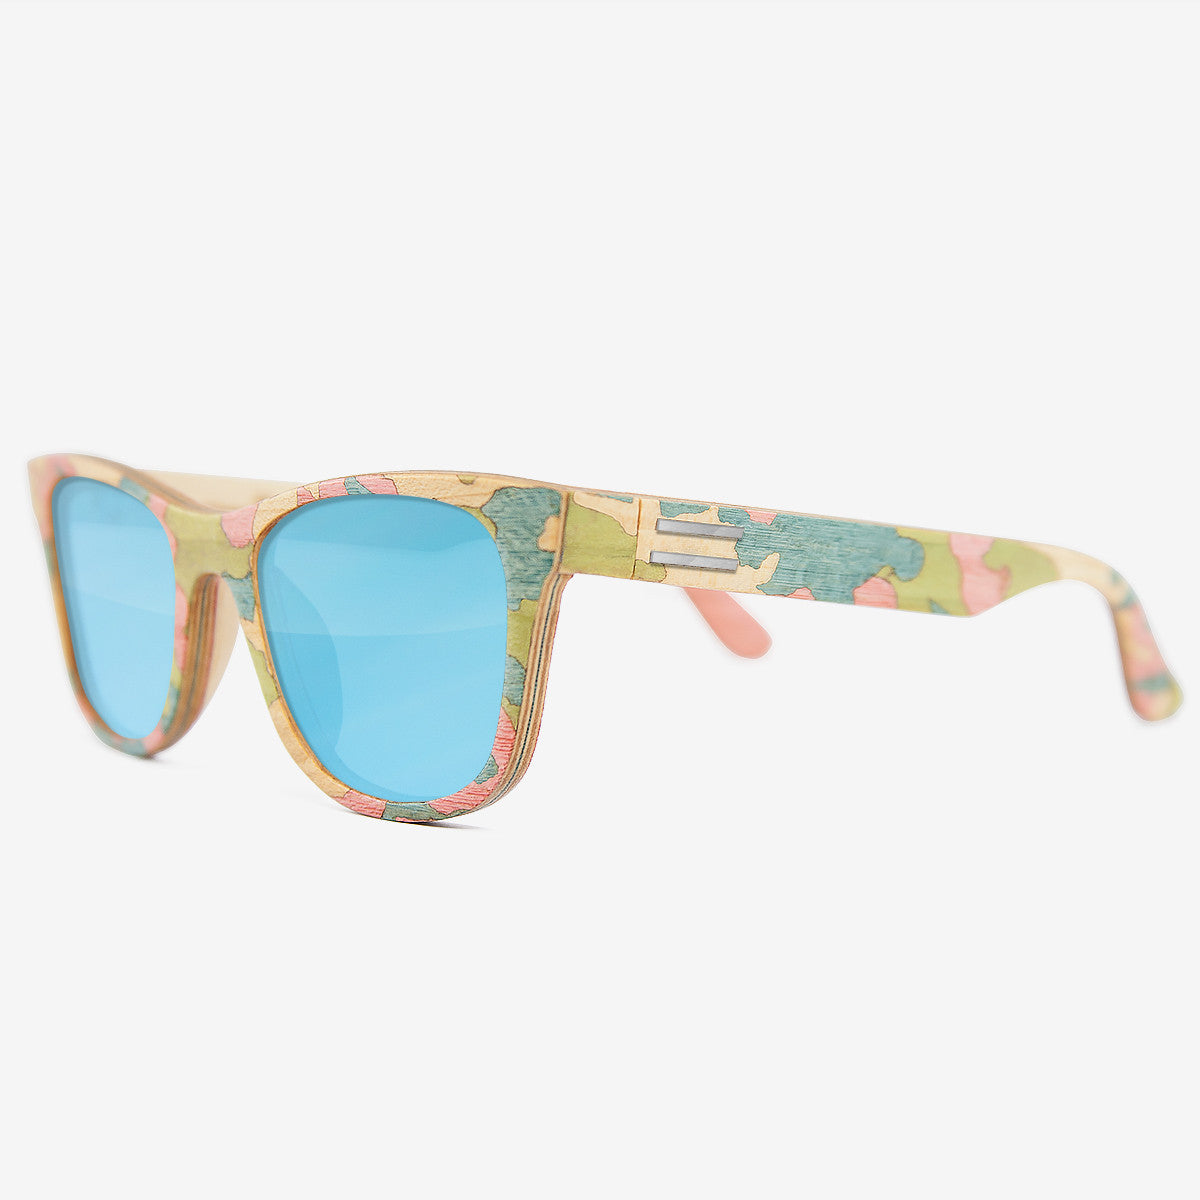 Pink and light blue camouflage wood sunglasses